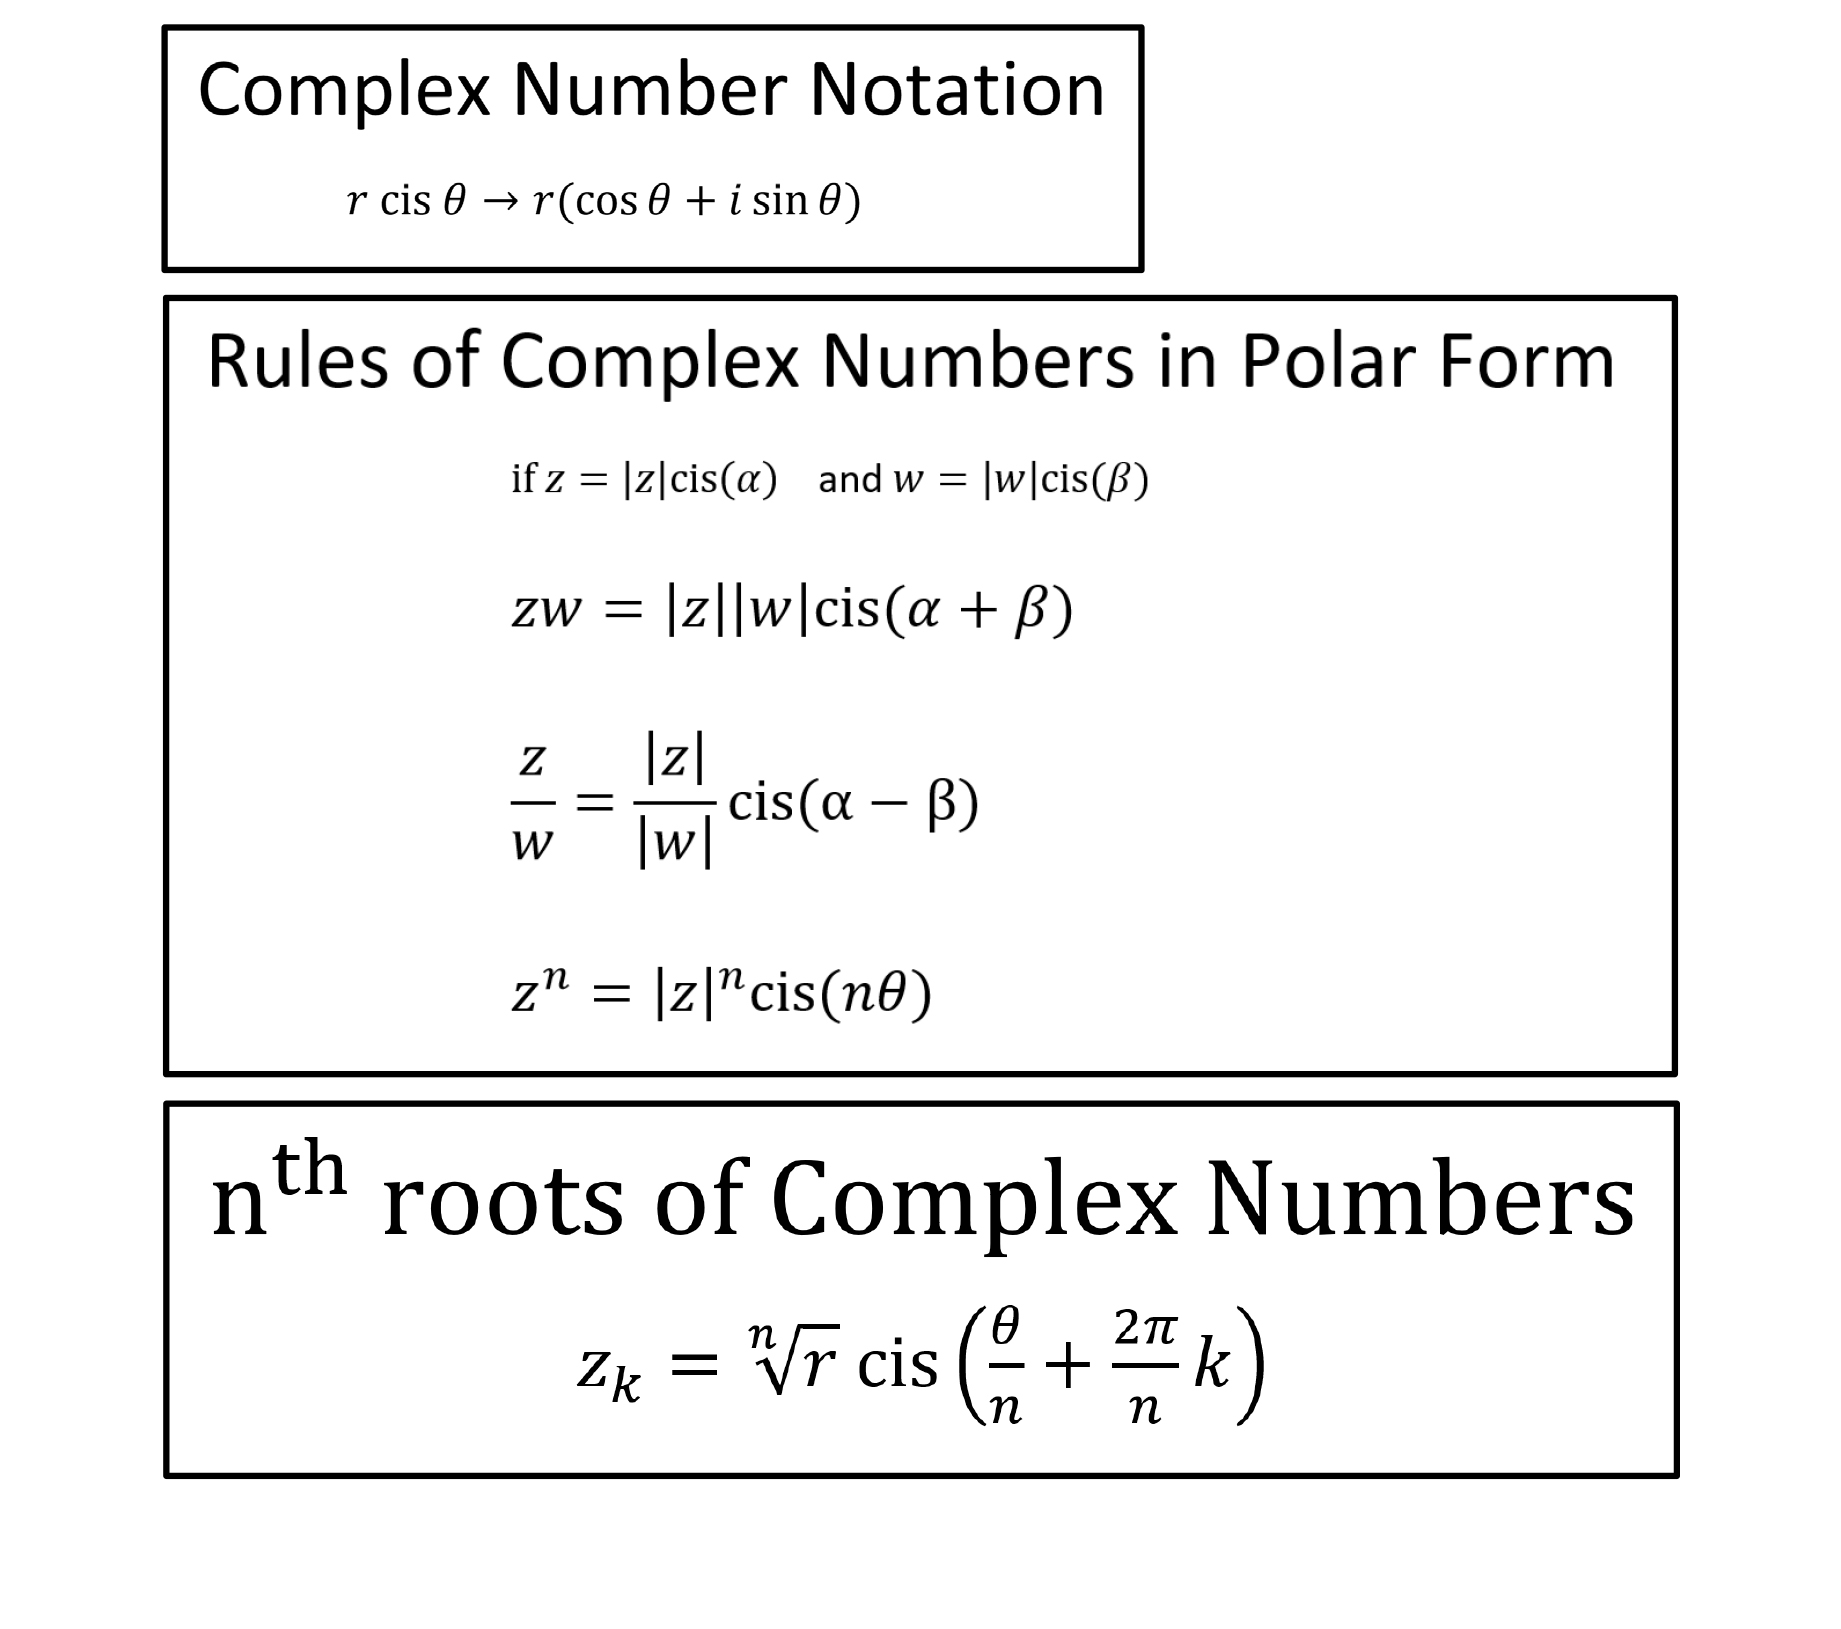 Notes for Complex Polar Numbers